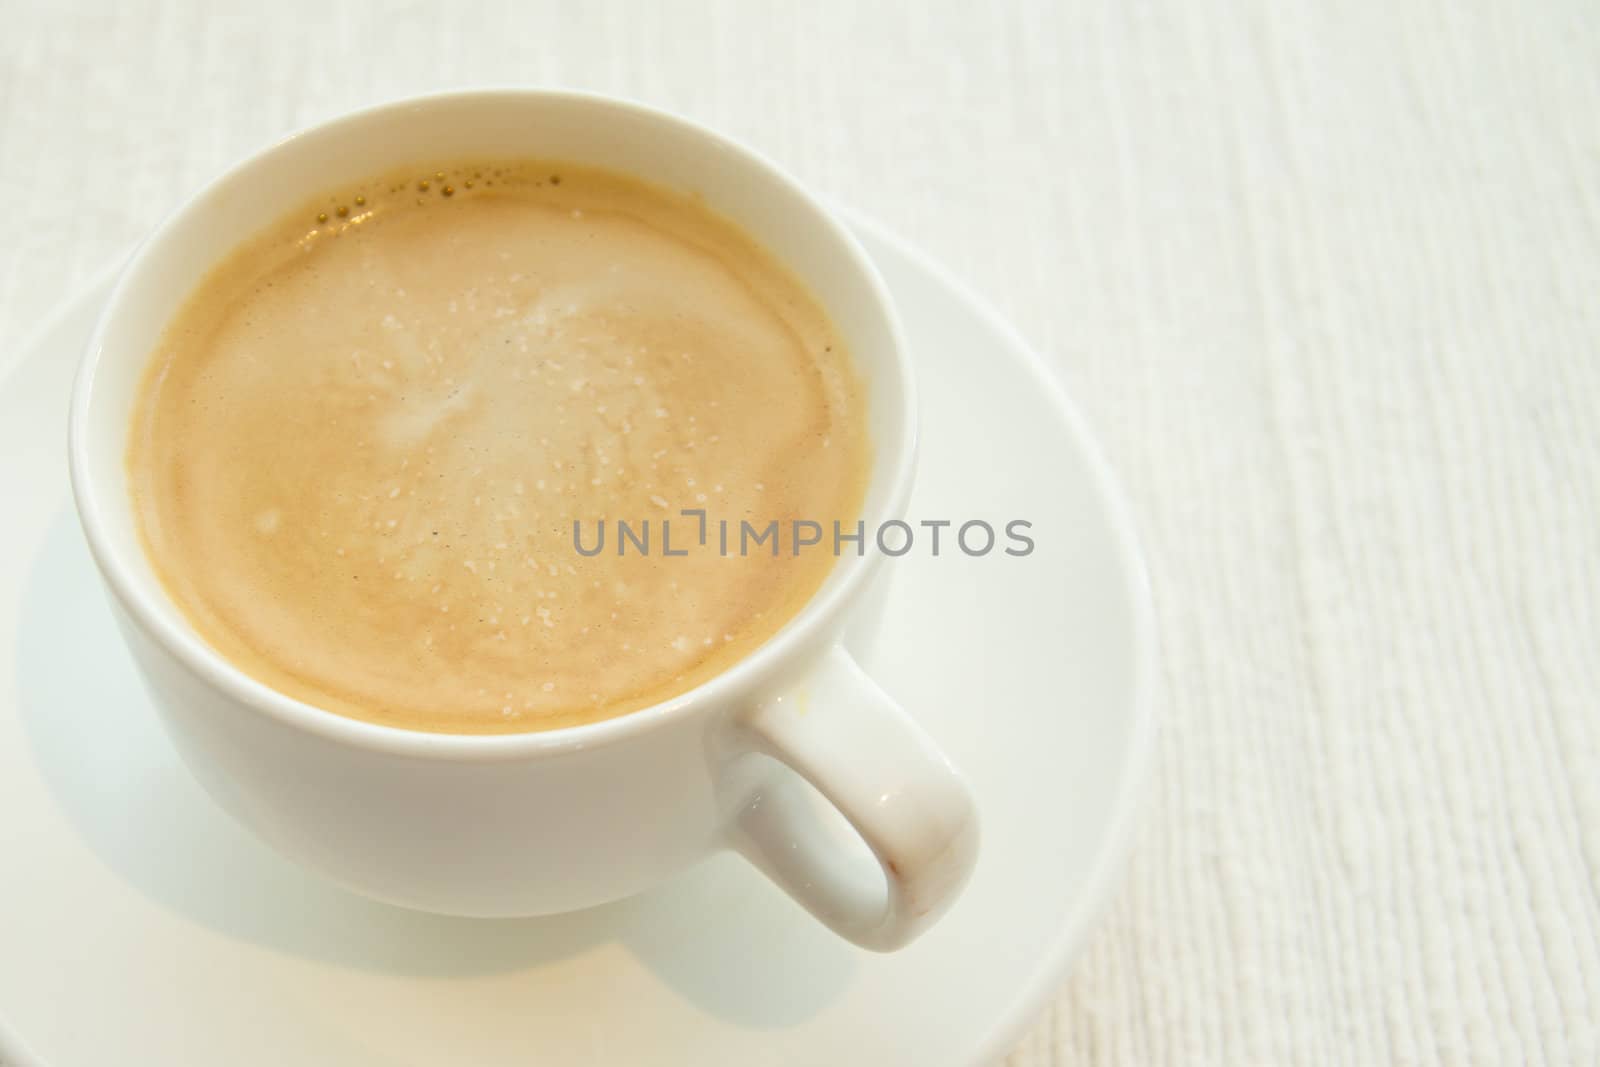 Picture of a cup of coffee on white cloth